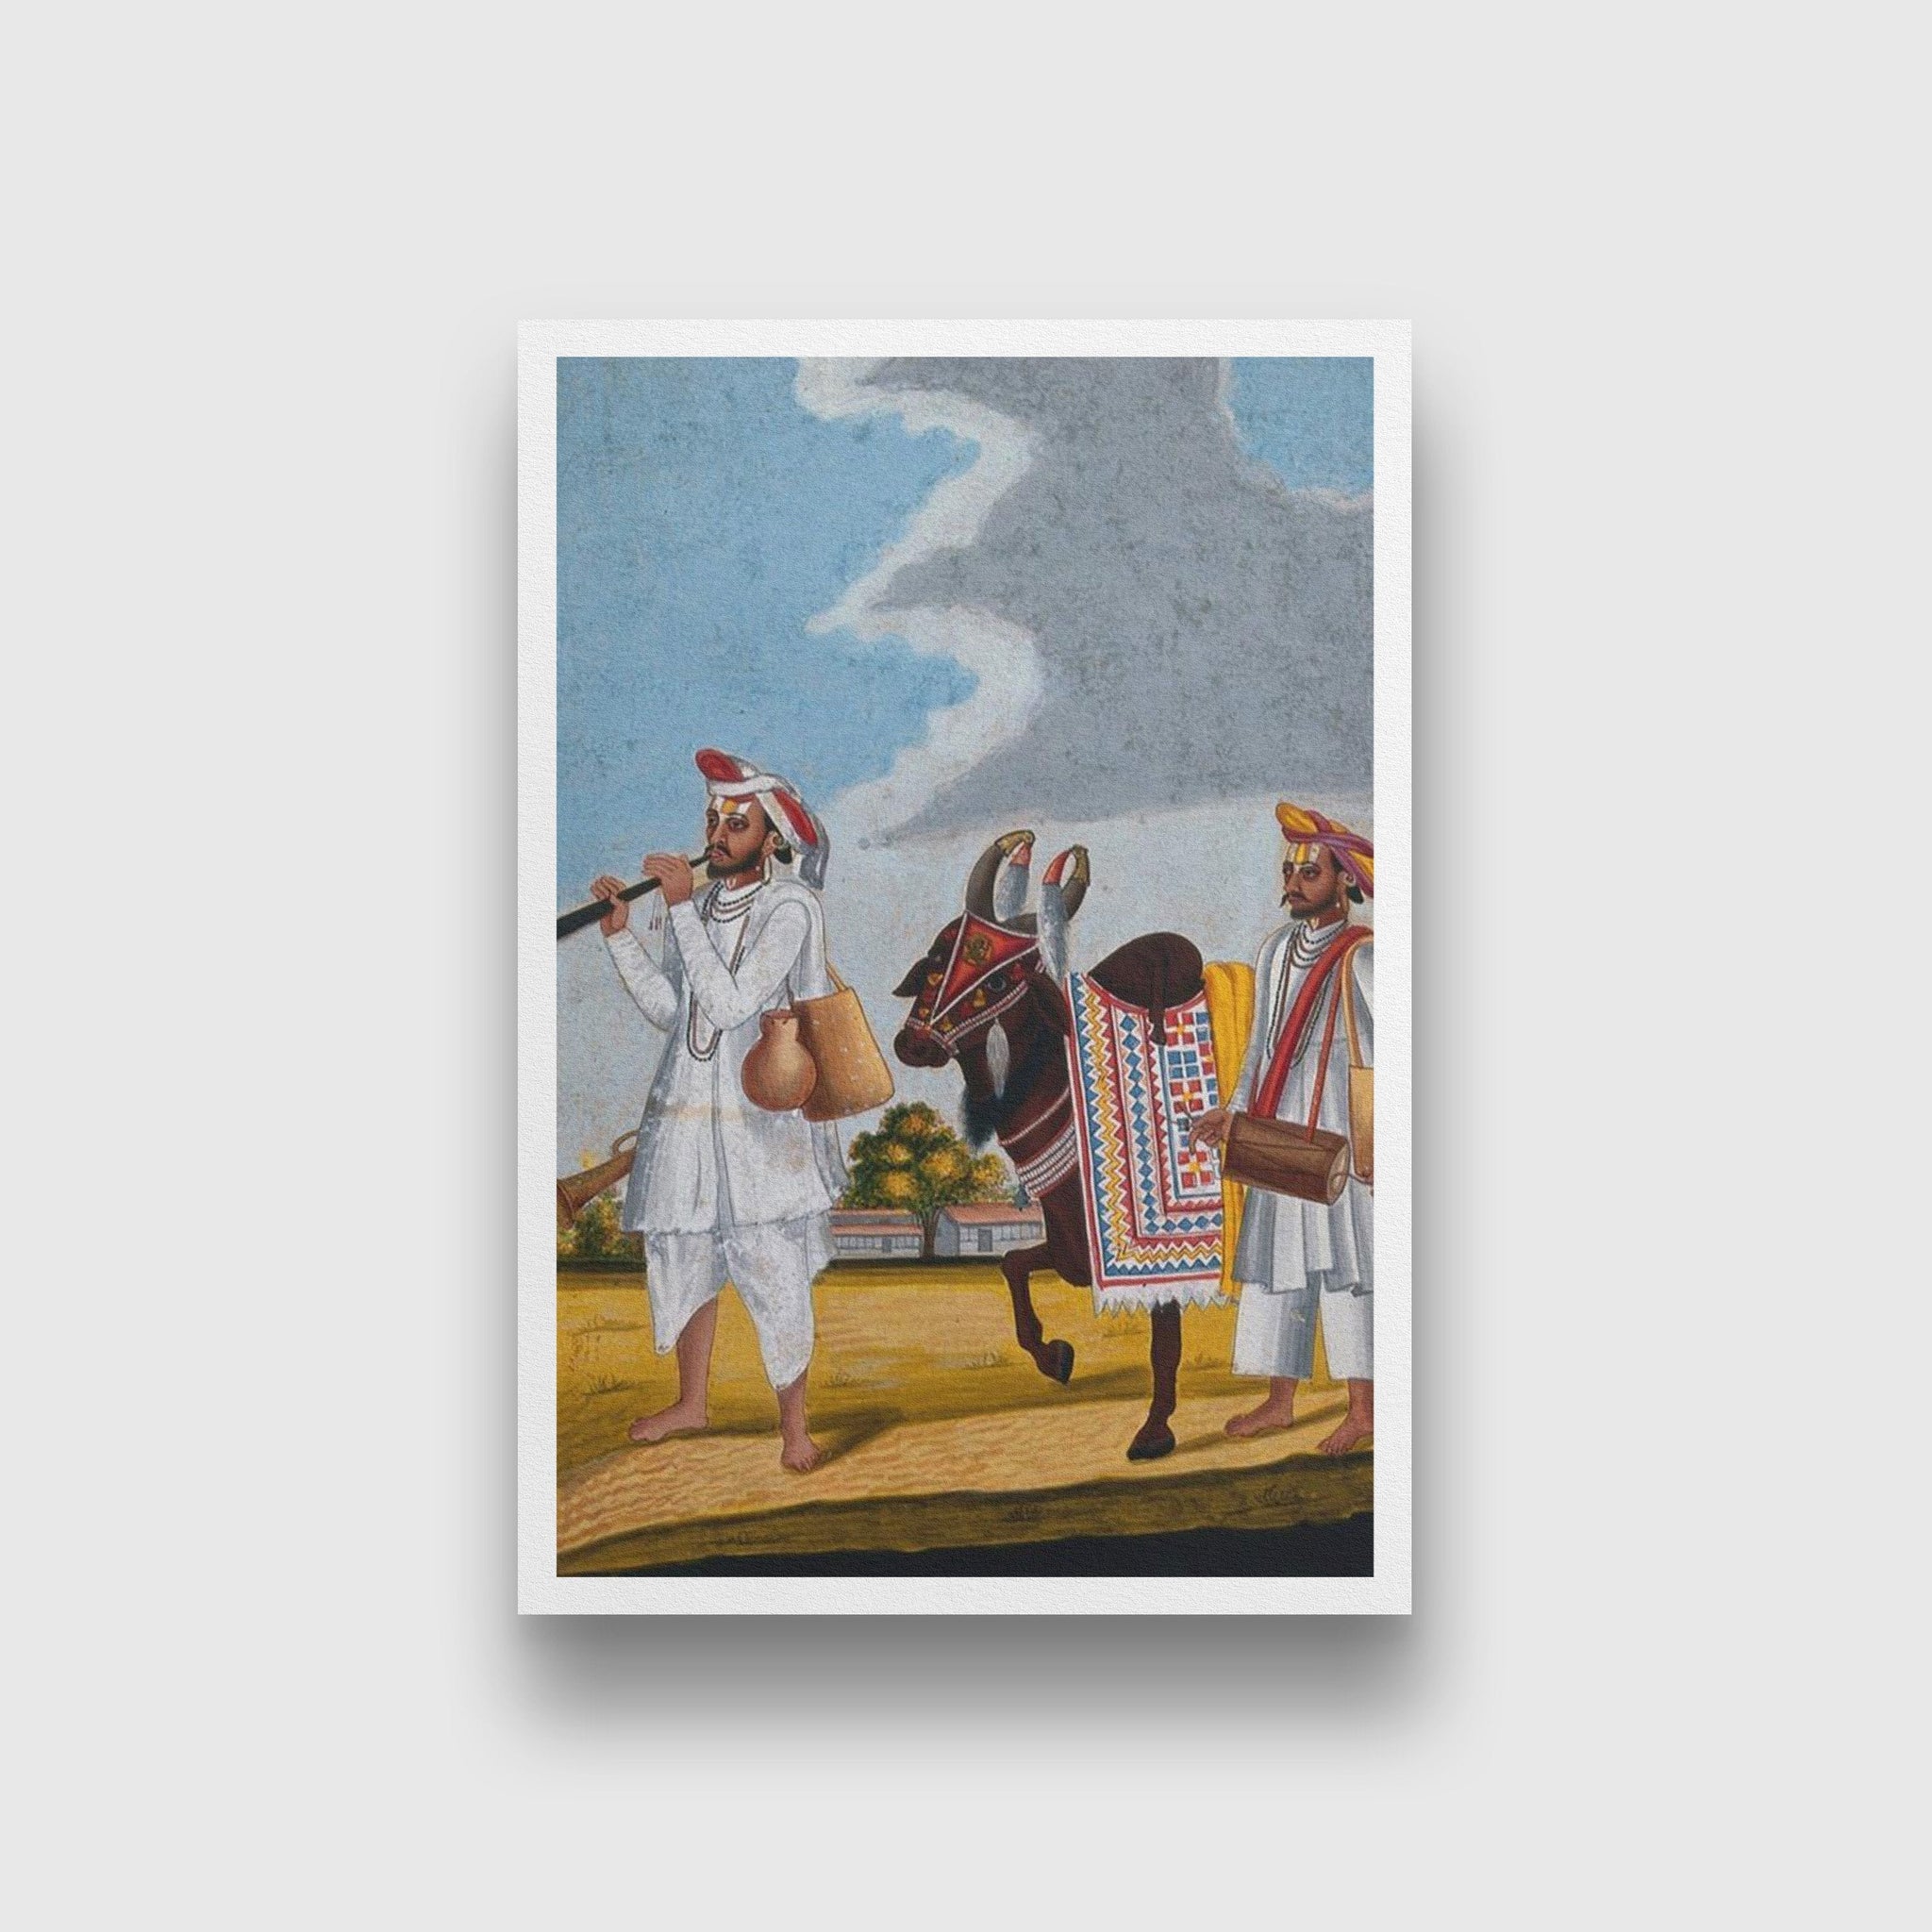 Two Hindu musicians and a highly decorated cow Painting - Meri Deewar